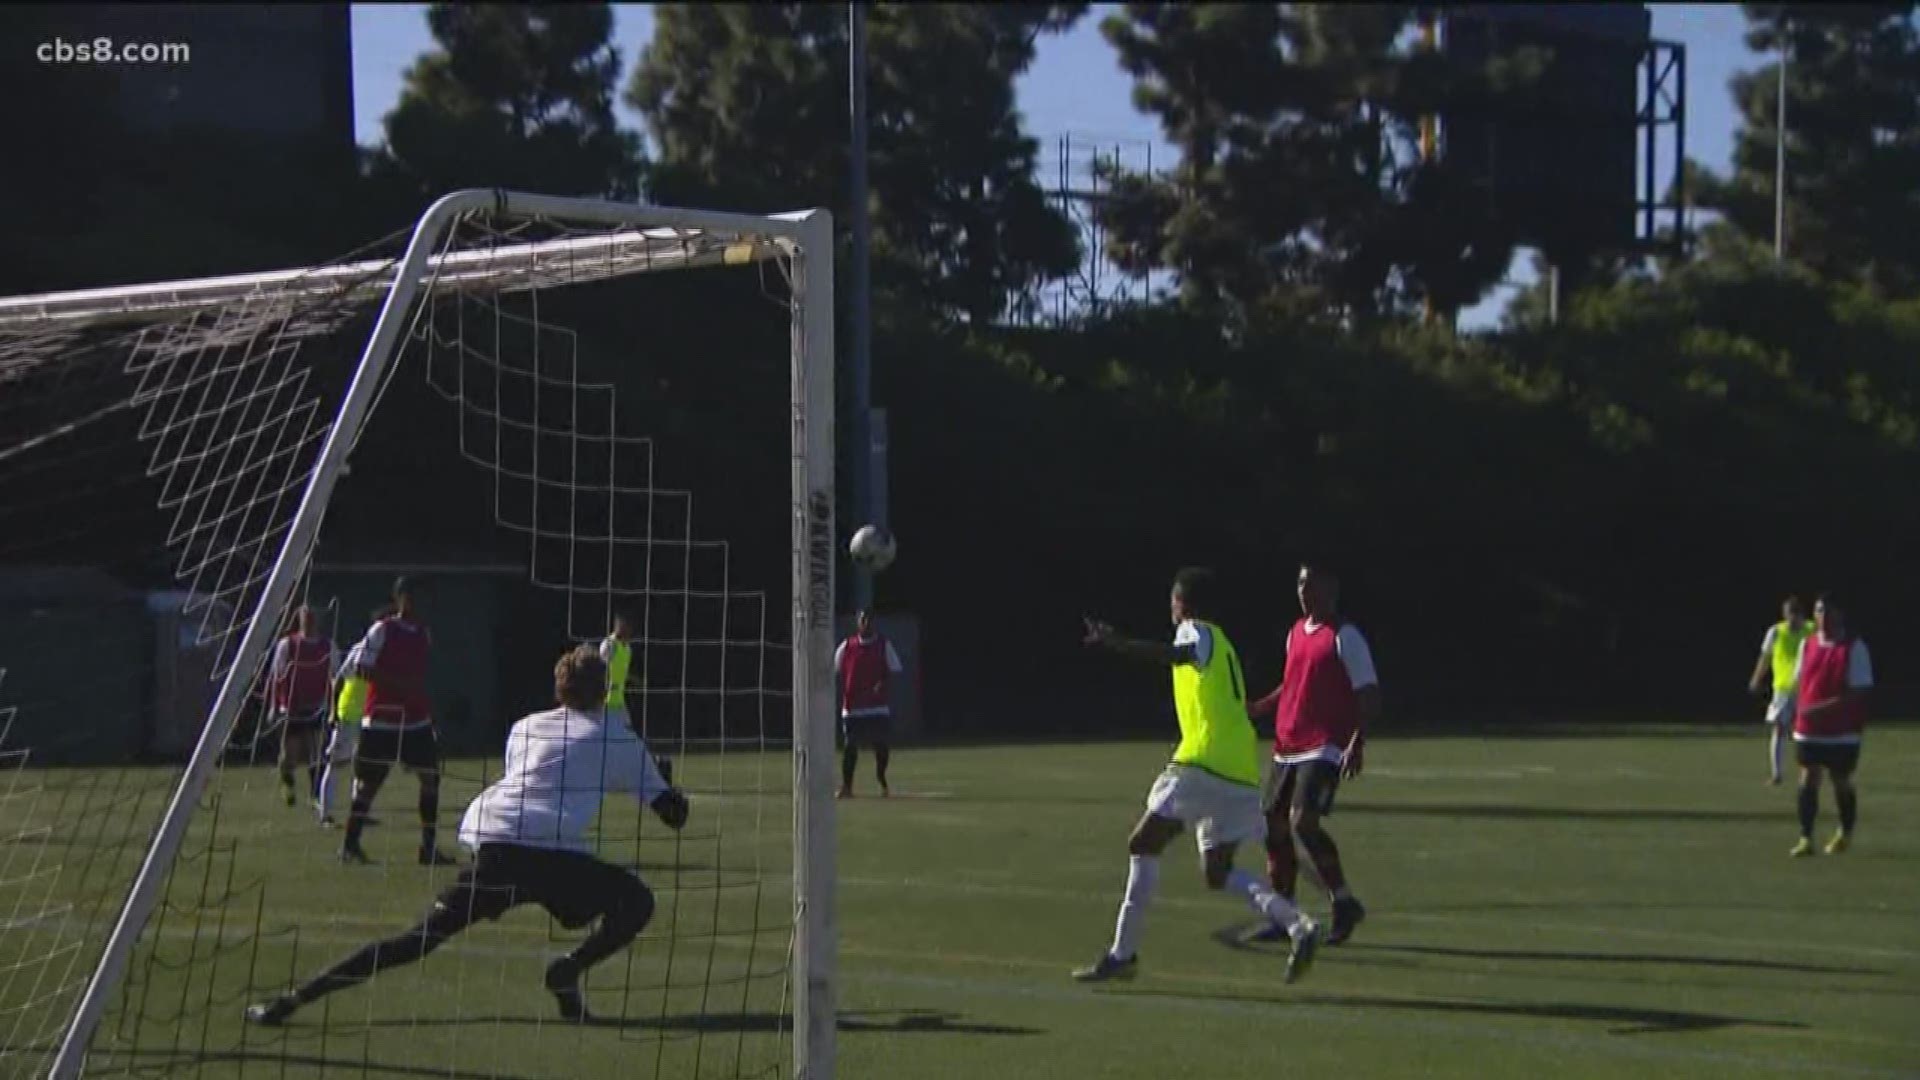 San Diego Loyal soccer team holds open tryouts